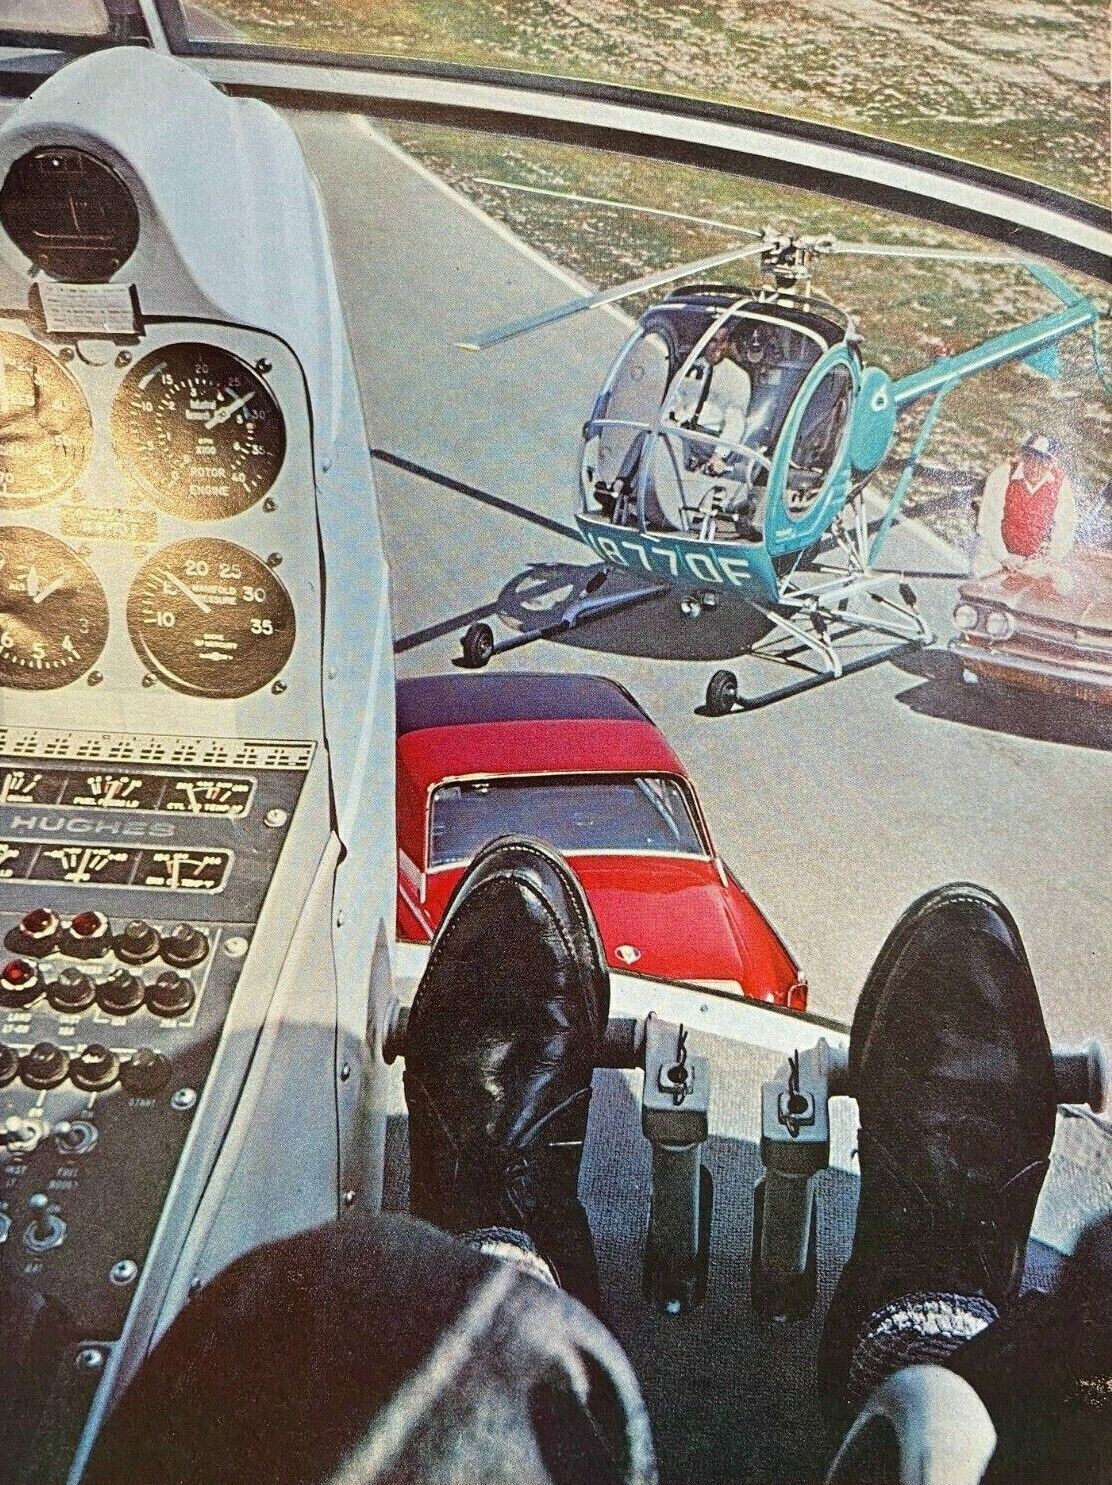 Road Test 1965 Hughes 269-A Helicopter illustrated